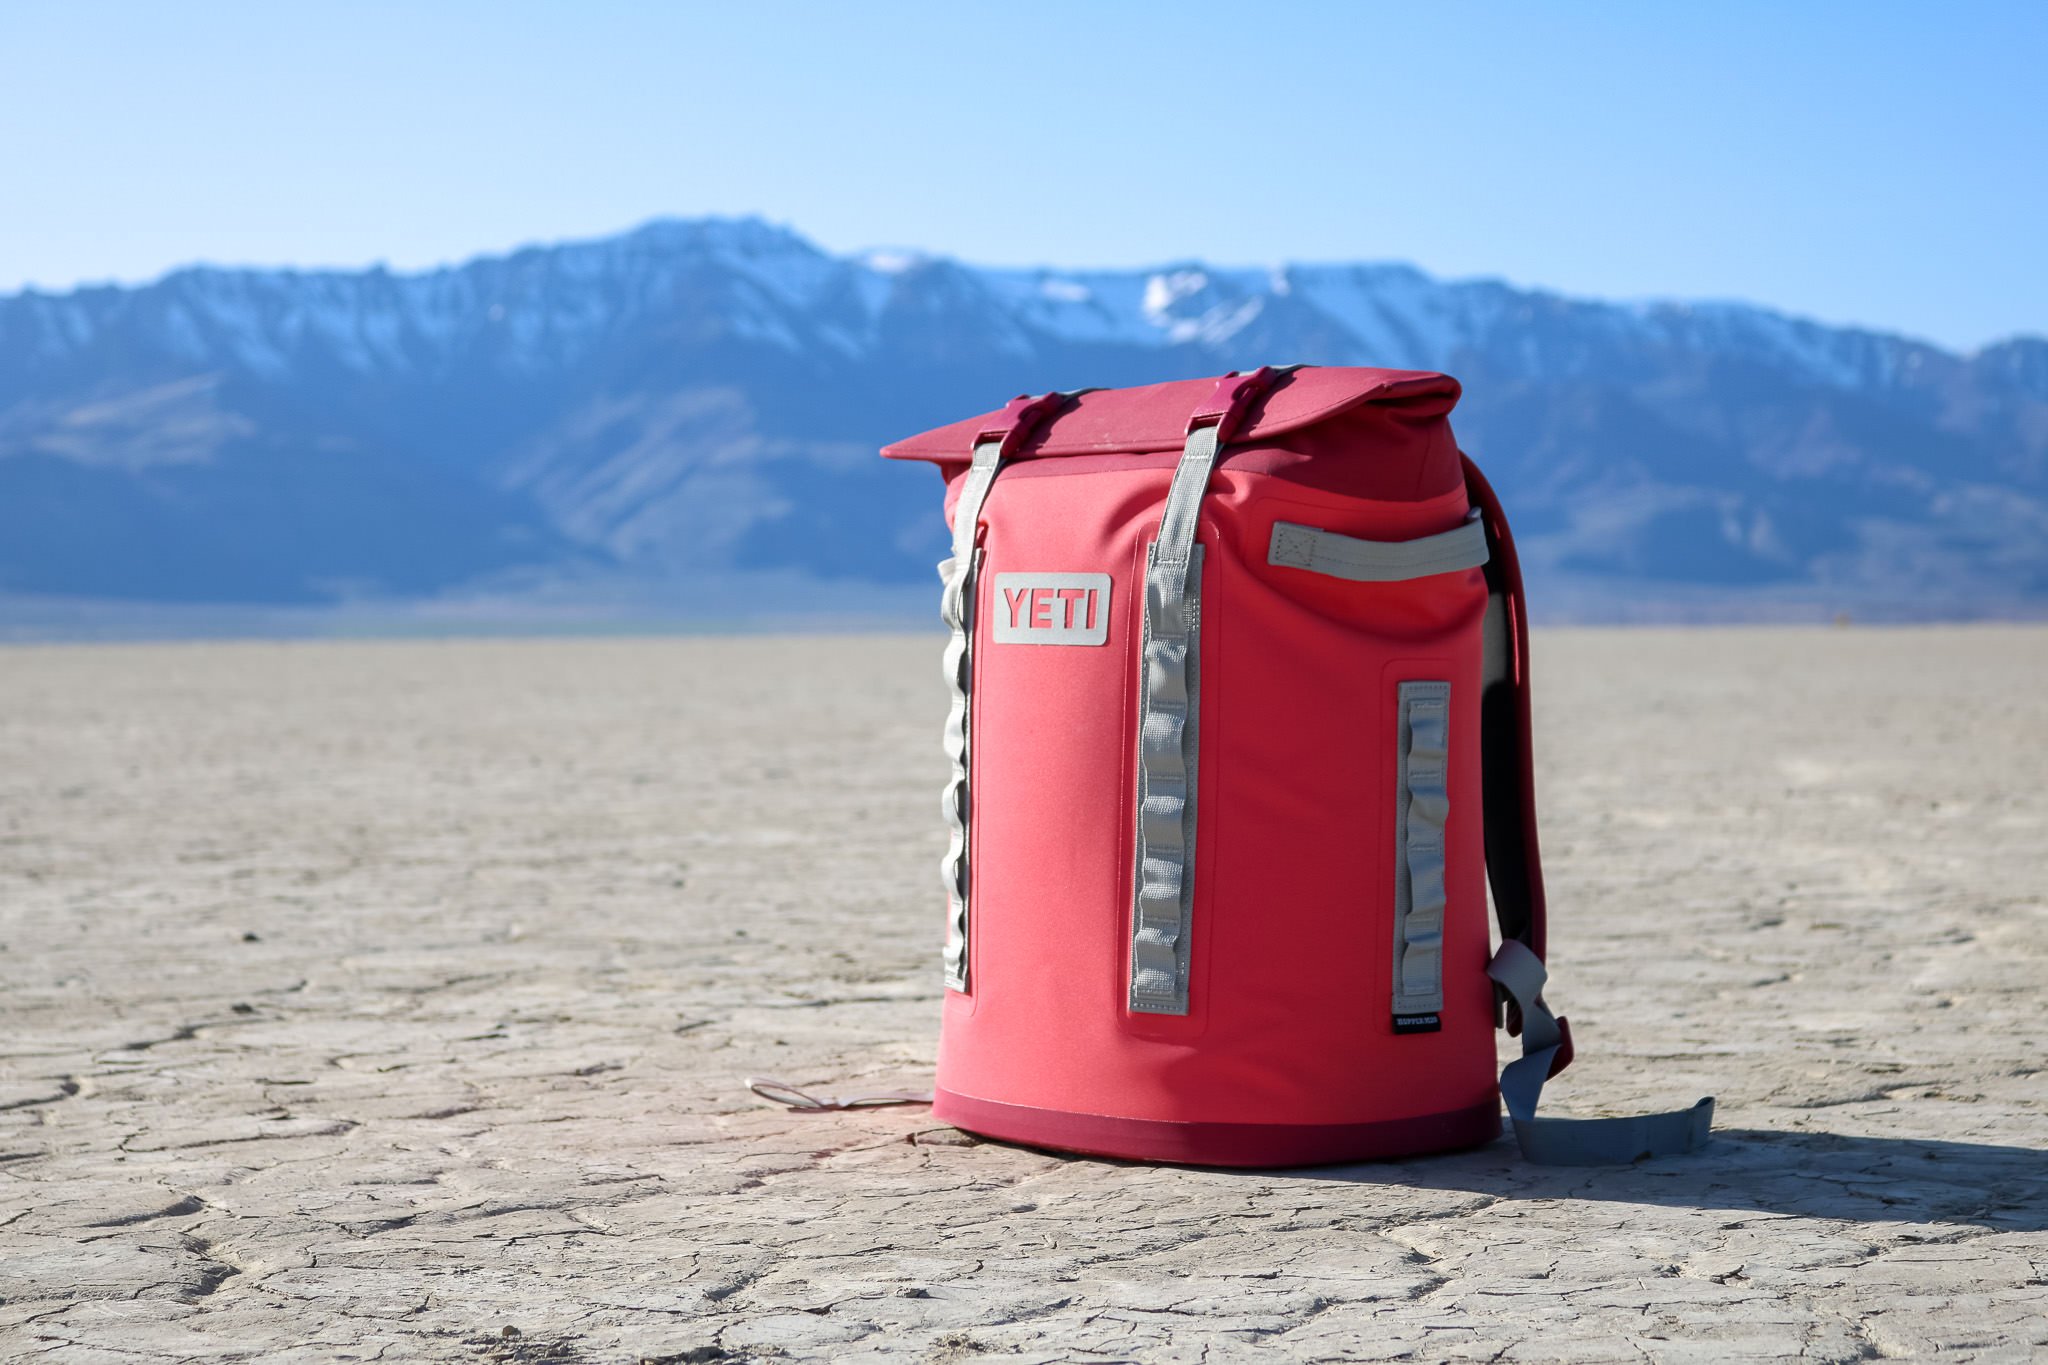 A YETI Hopper Soft Cooler being used on a camping trip in the Alvord Desert